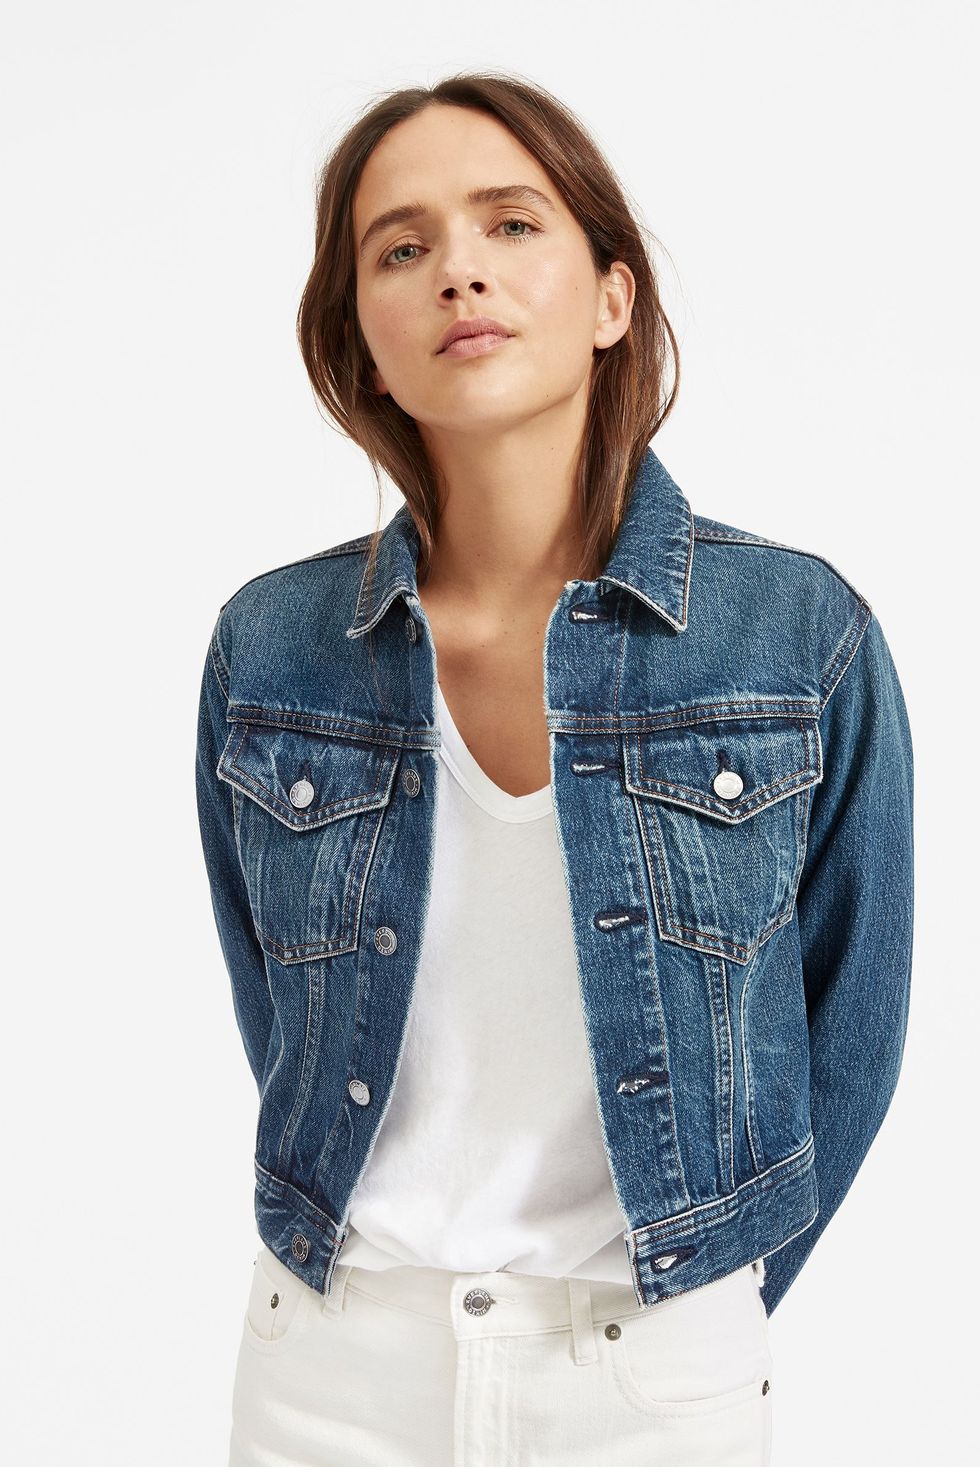 Buy Meghan Markle's Madewell Denim Jacket Before It Sells Out